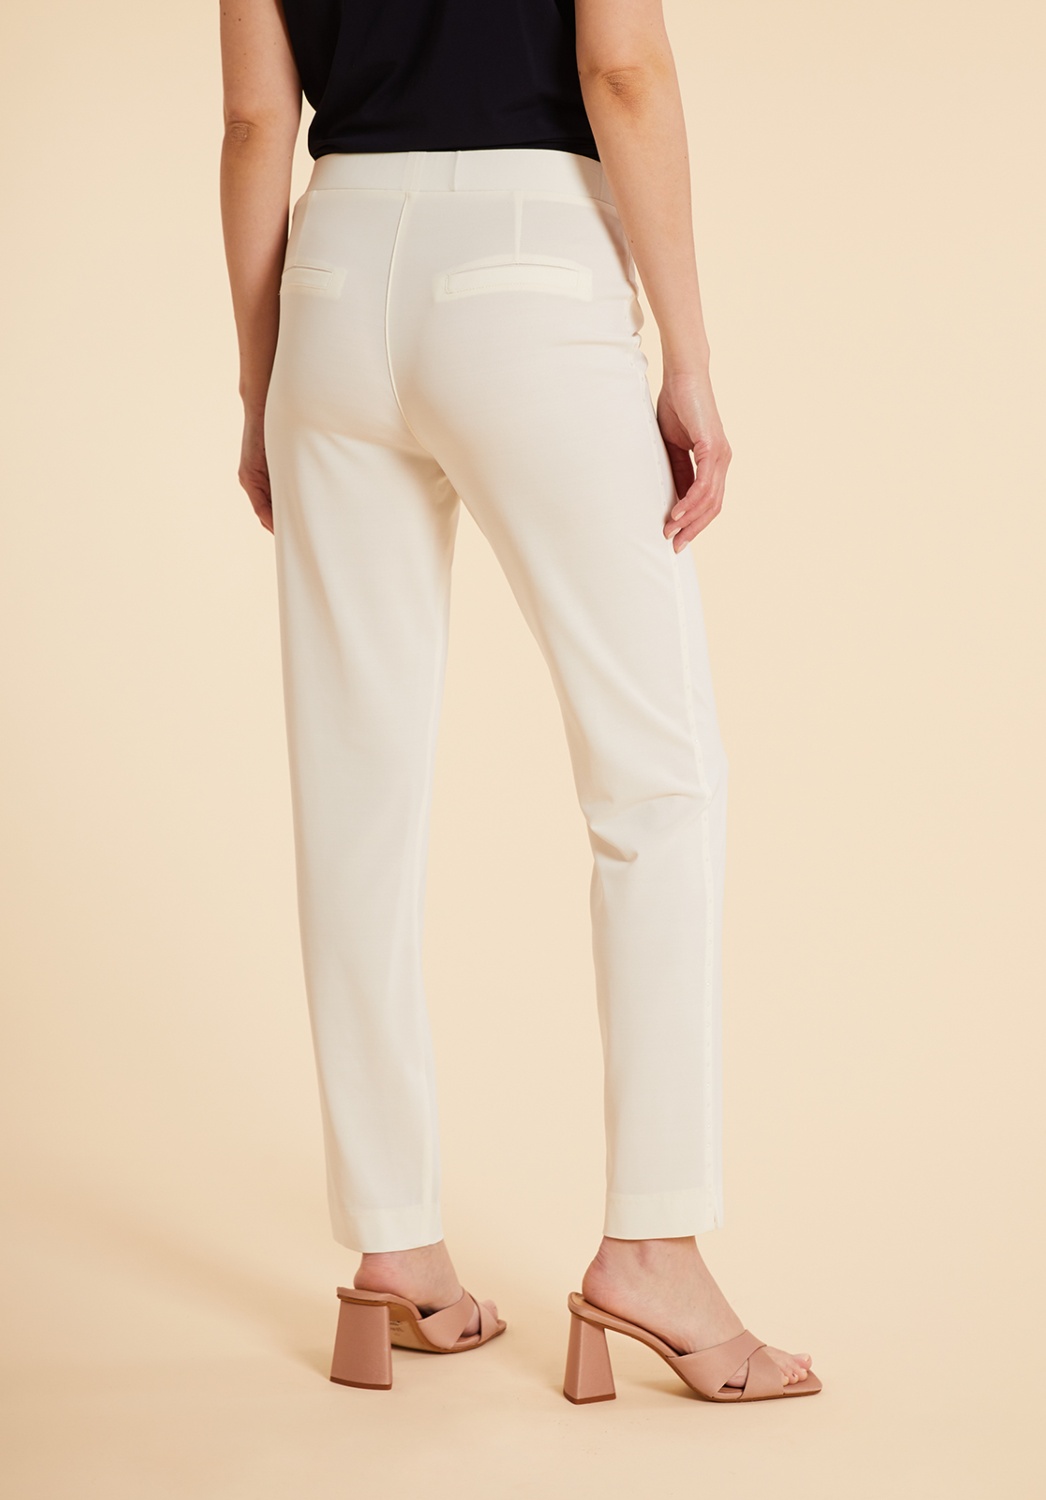 White Knit Trousers With Rhinestones 3